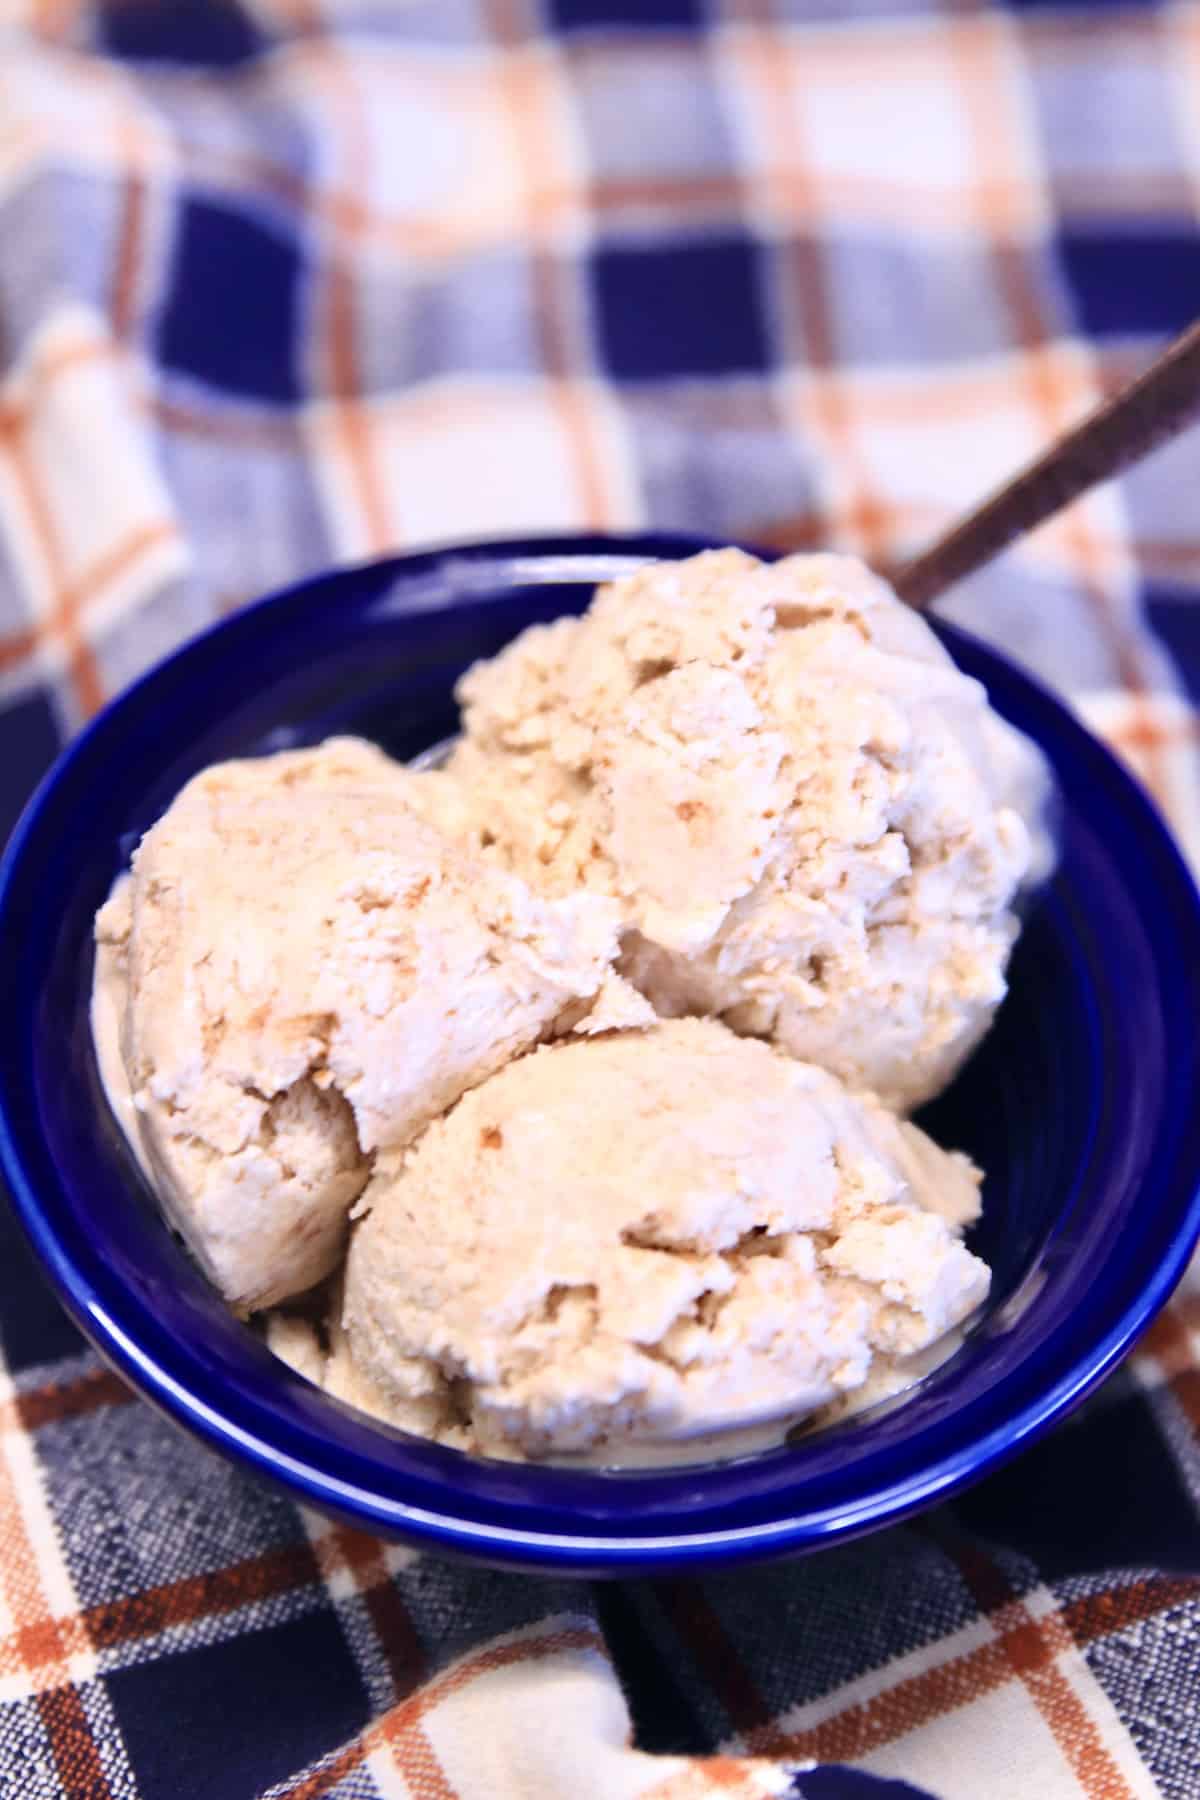 Bowl of 3 scoops of cinnamon ice cream with a spoon.